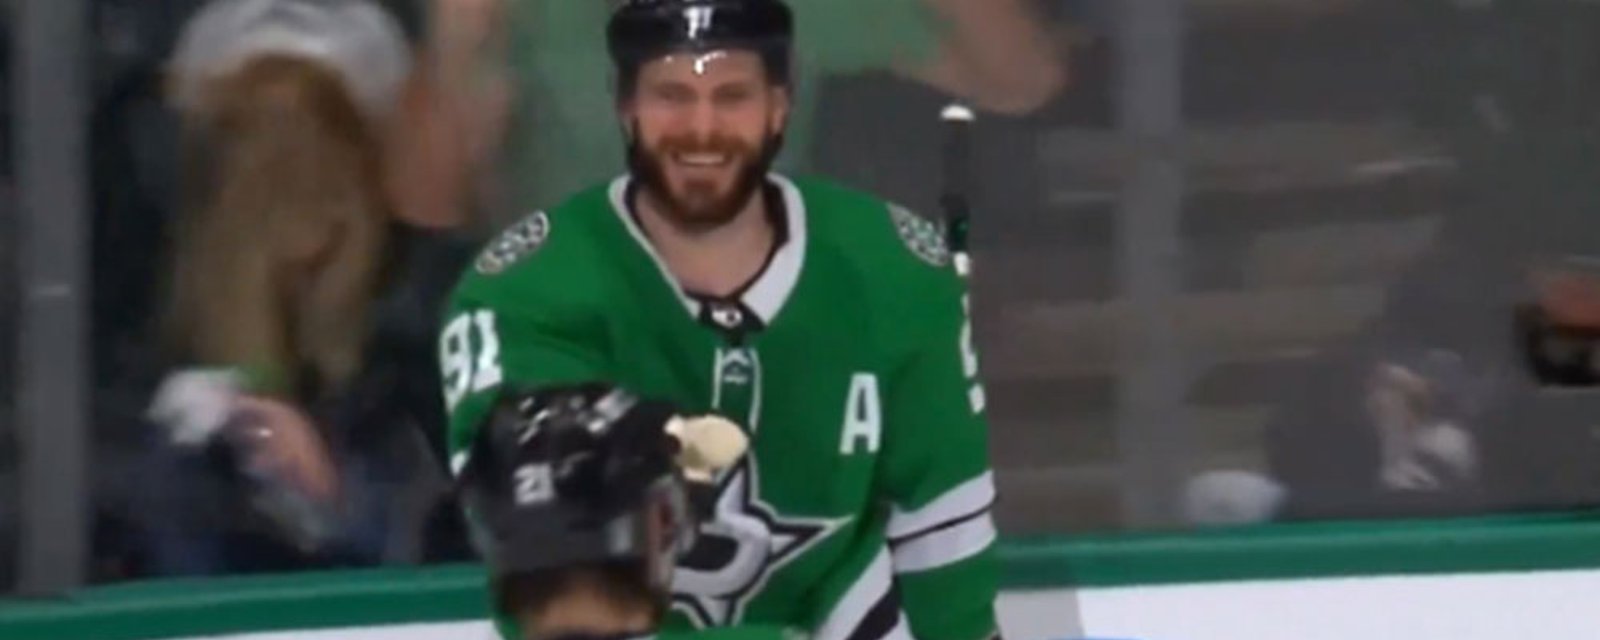 Seguin ties it late in Game 1 